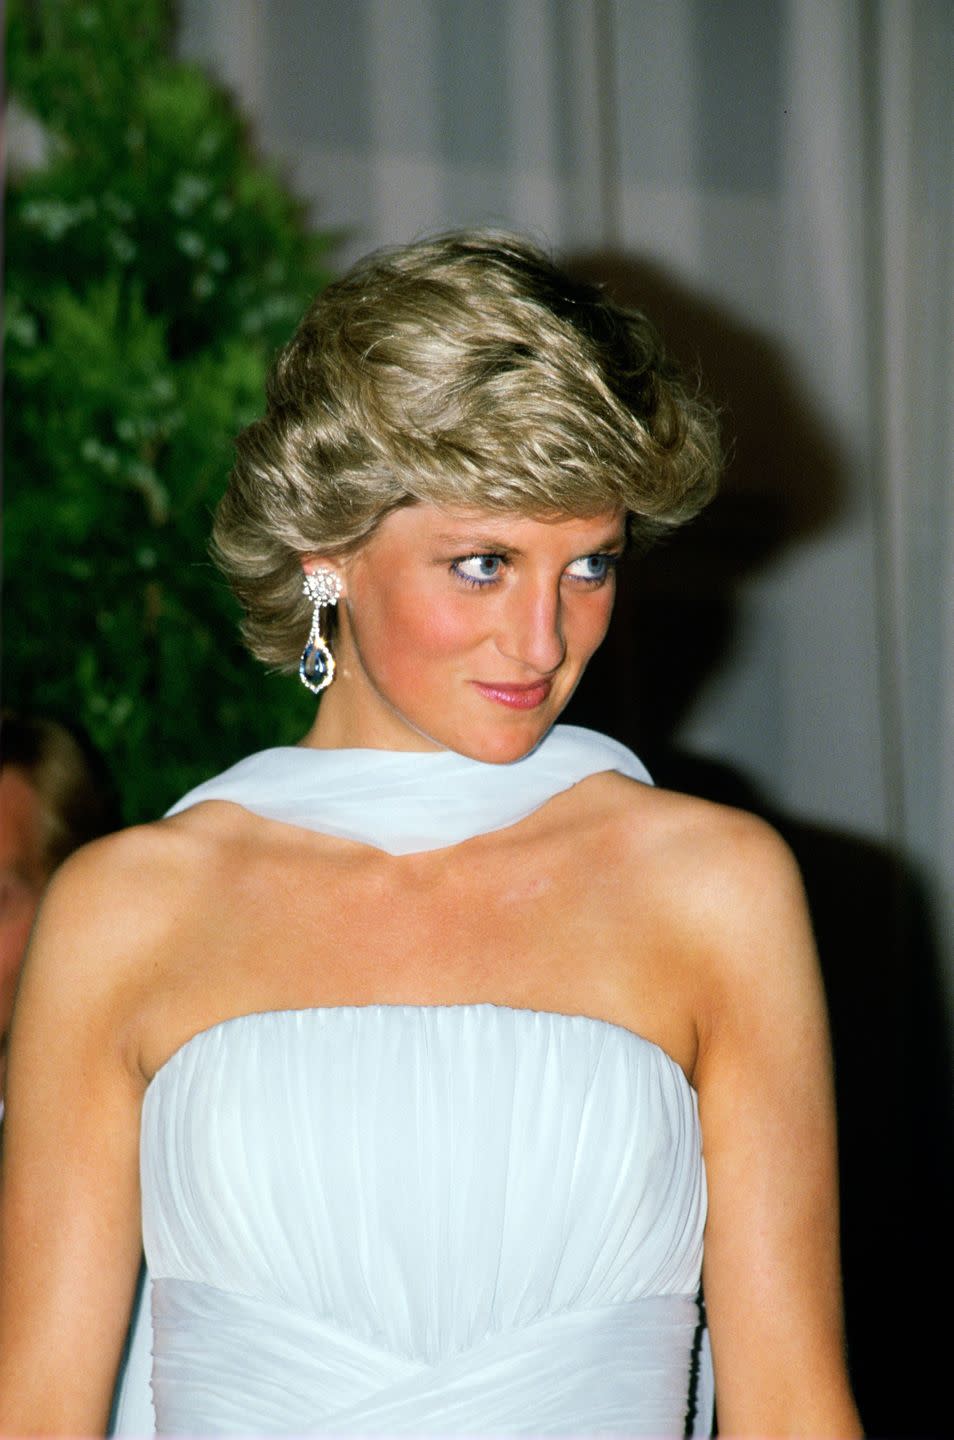 13 Photos of the Royals in Aquamarines, Including Princess Diana's Famous Cocktail Ring